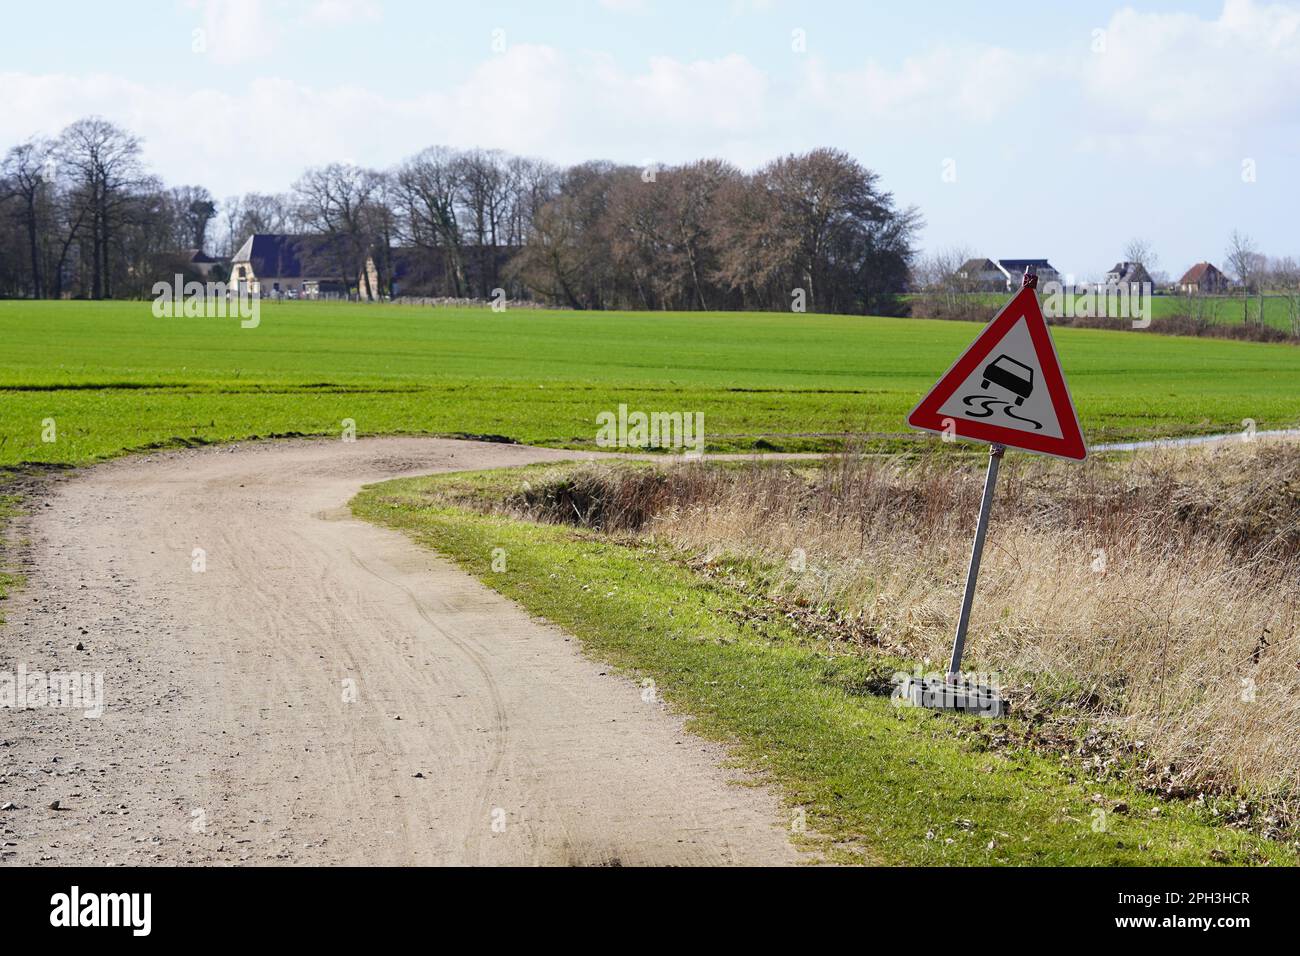 Risk of Skidding Road Sign, Germany Stock Photo